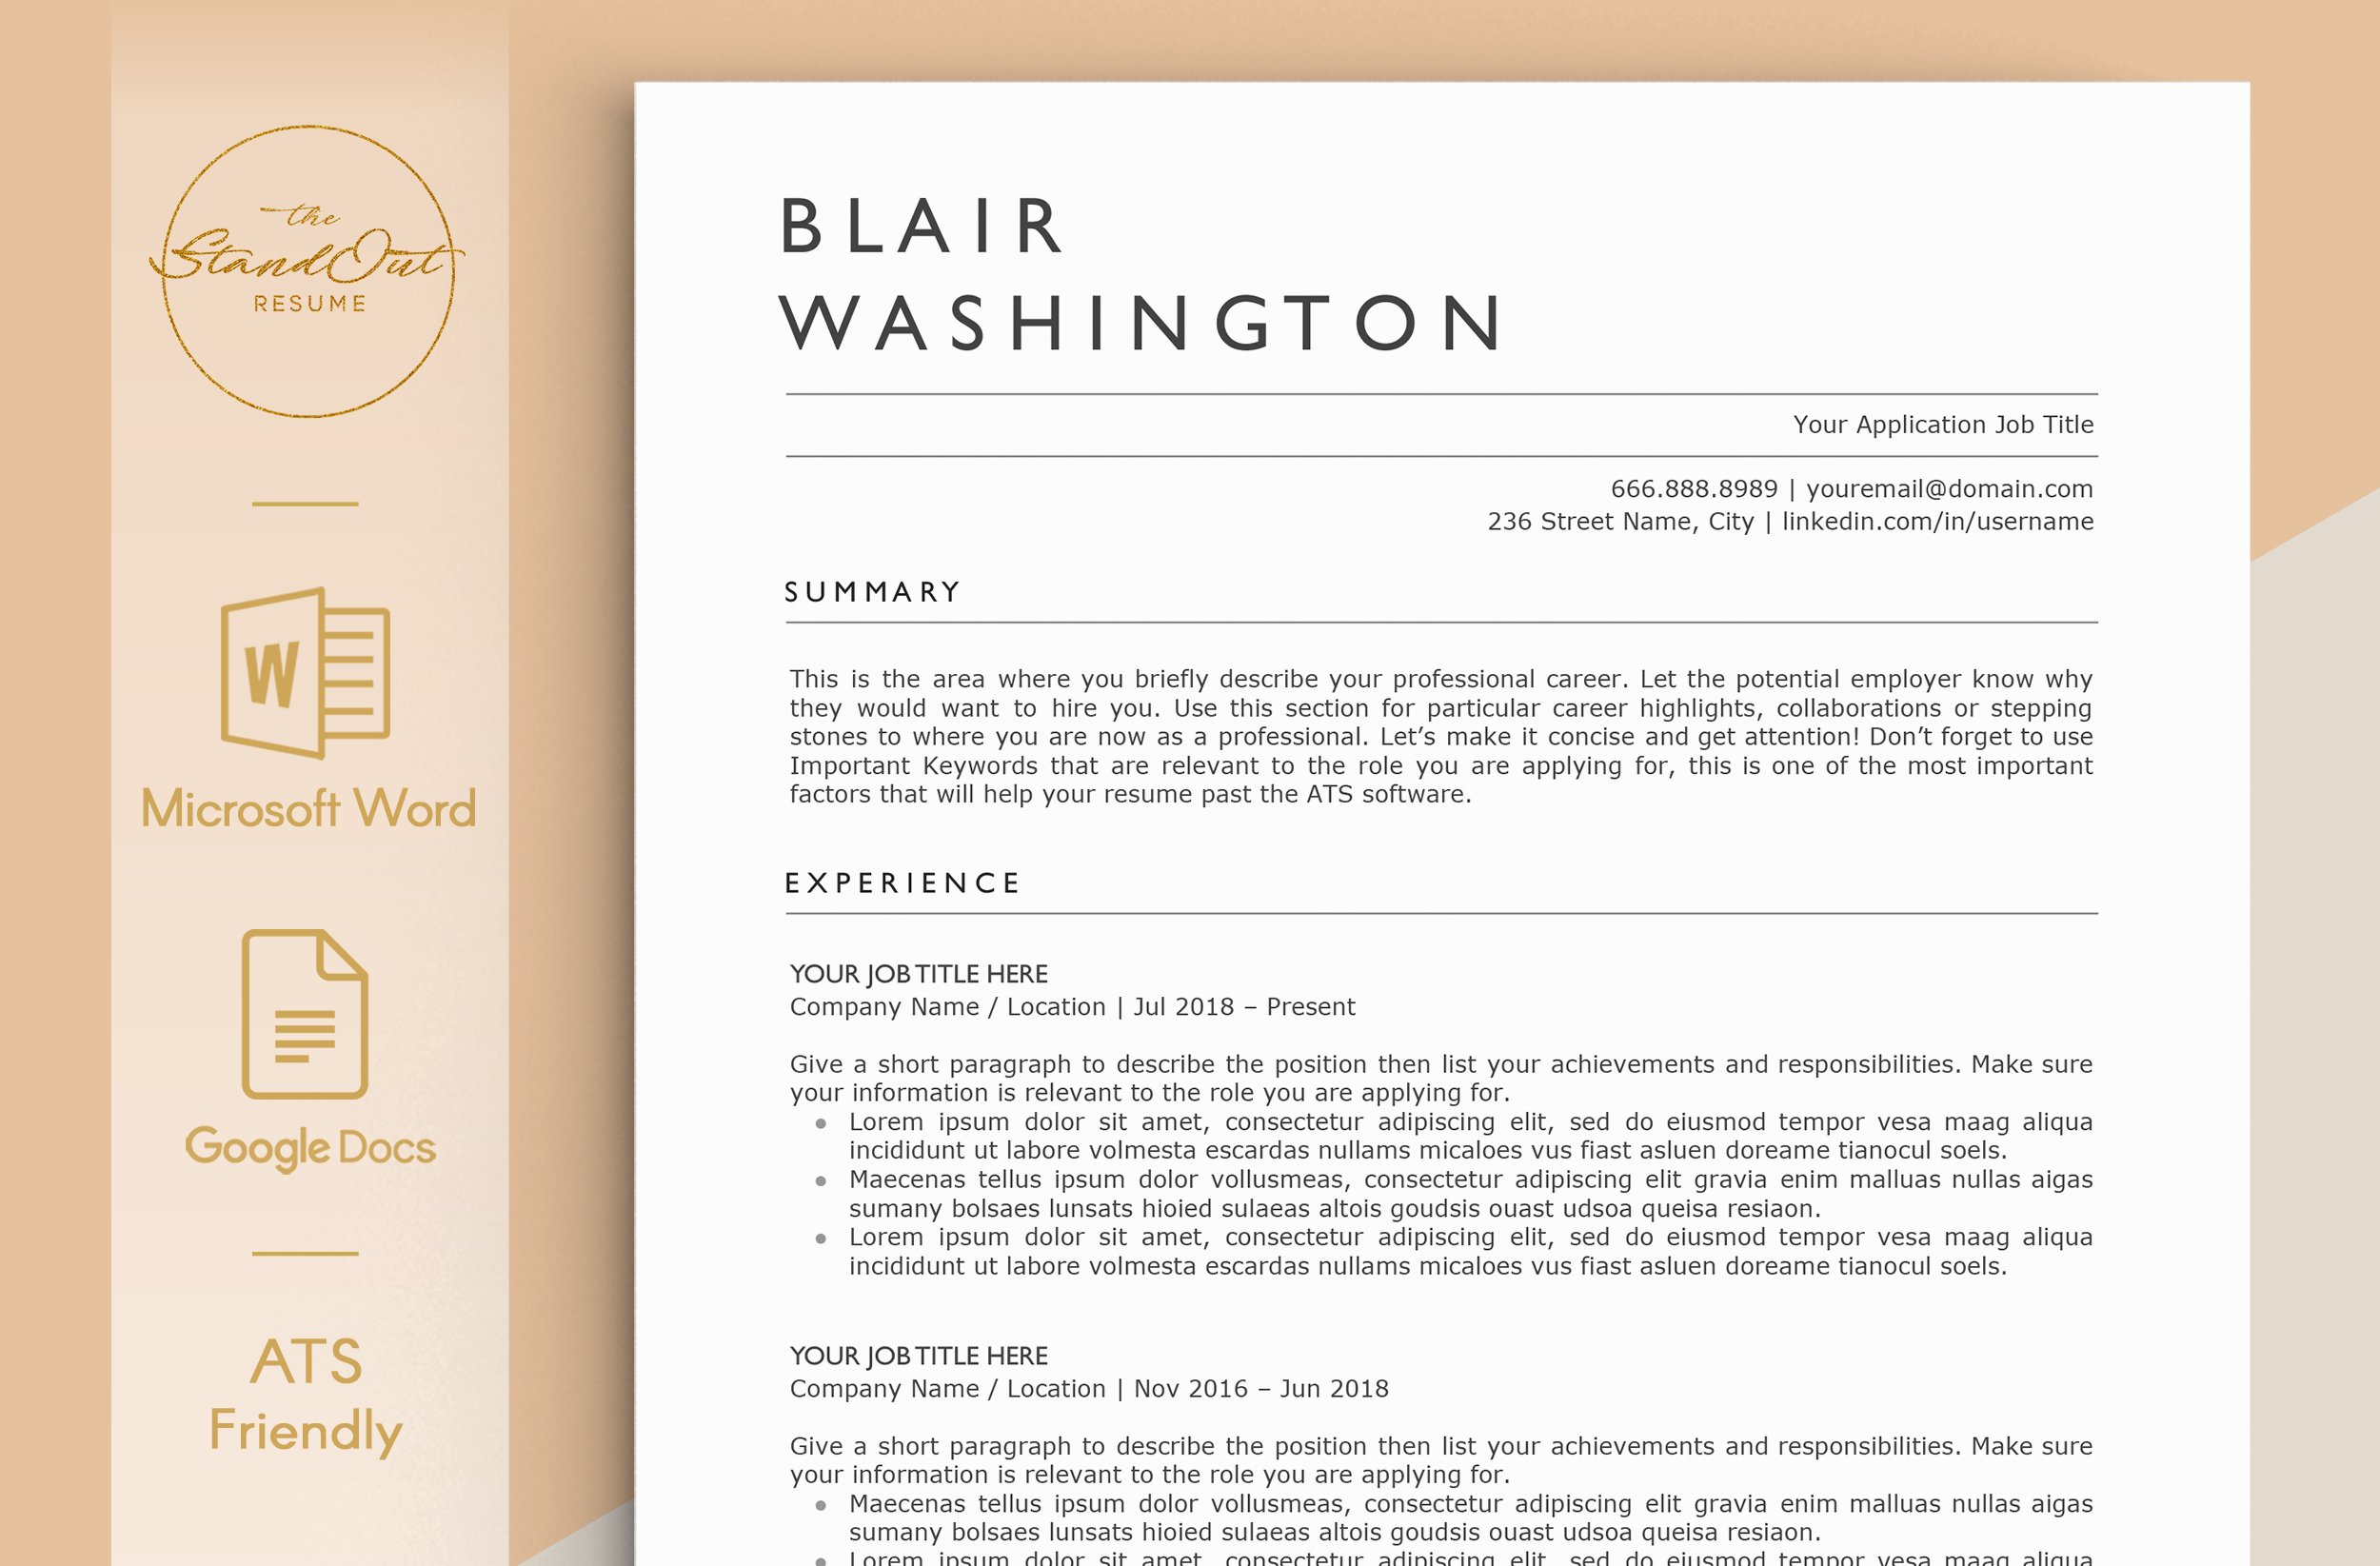 ATS Resume Template - BLAIR cover image.